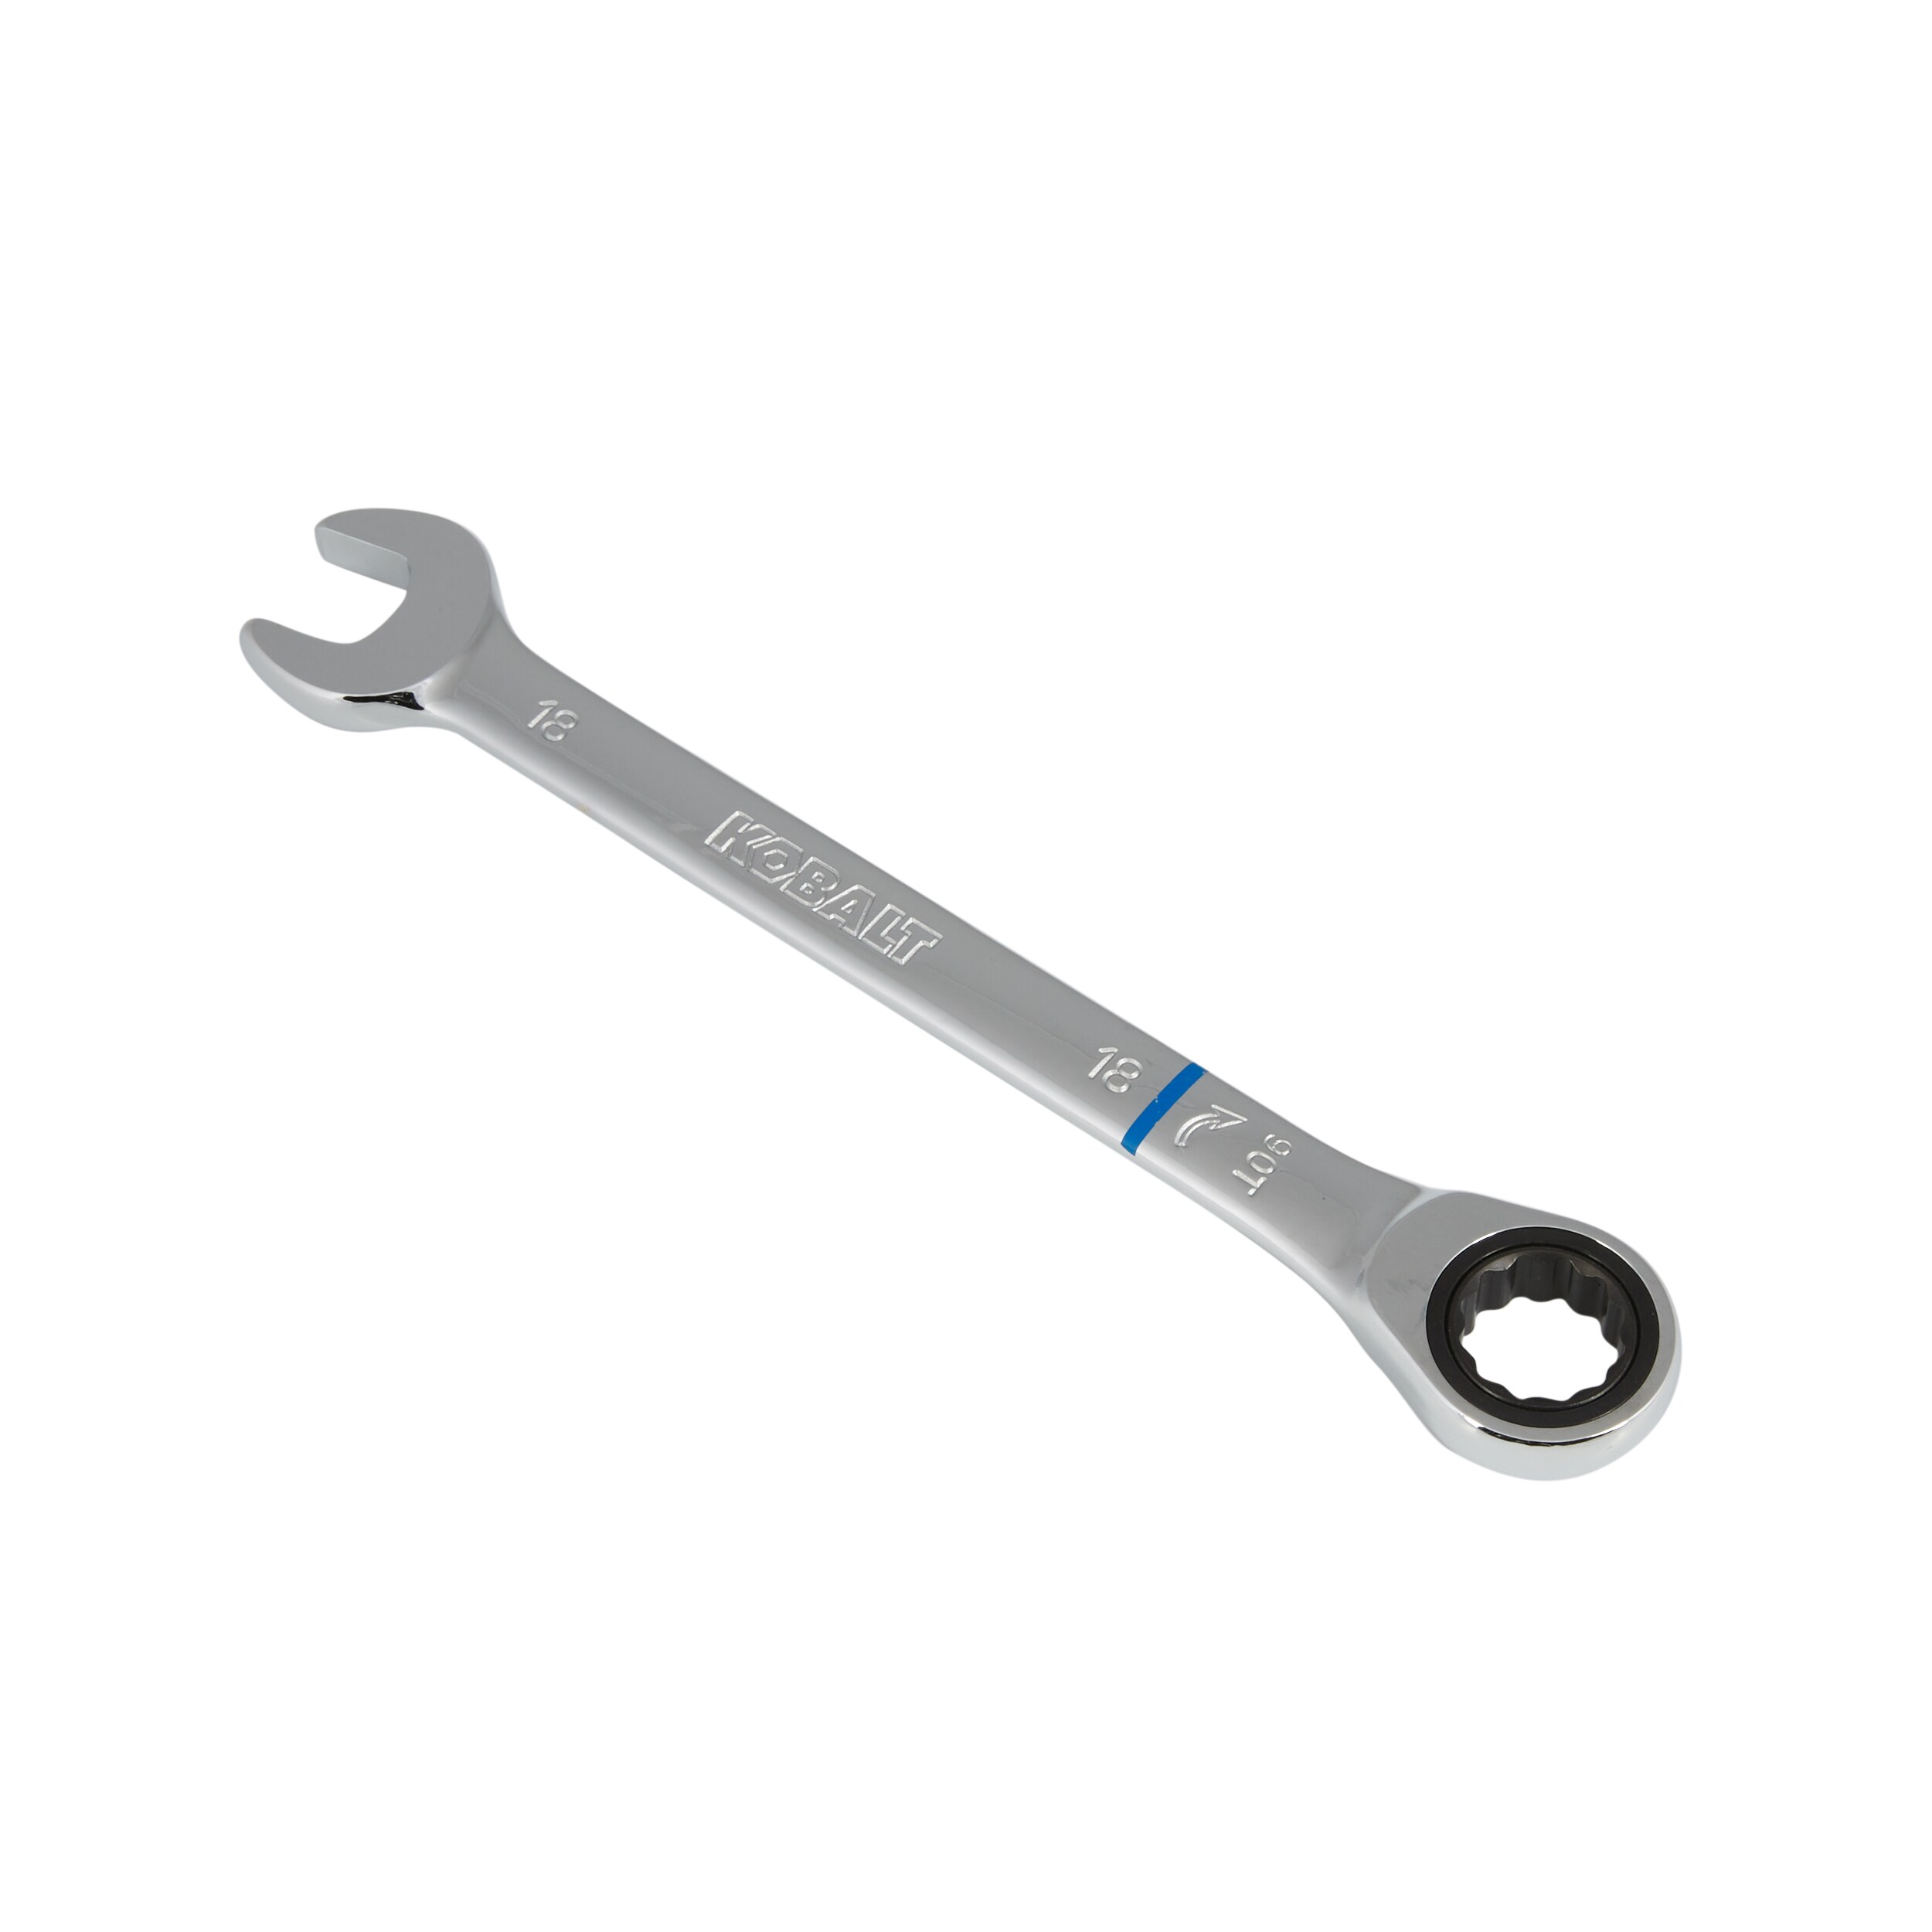 6mm-18mm Reversible Ratchet Gear Wrench Ratcheting Socket Spanner Nut Tool